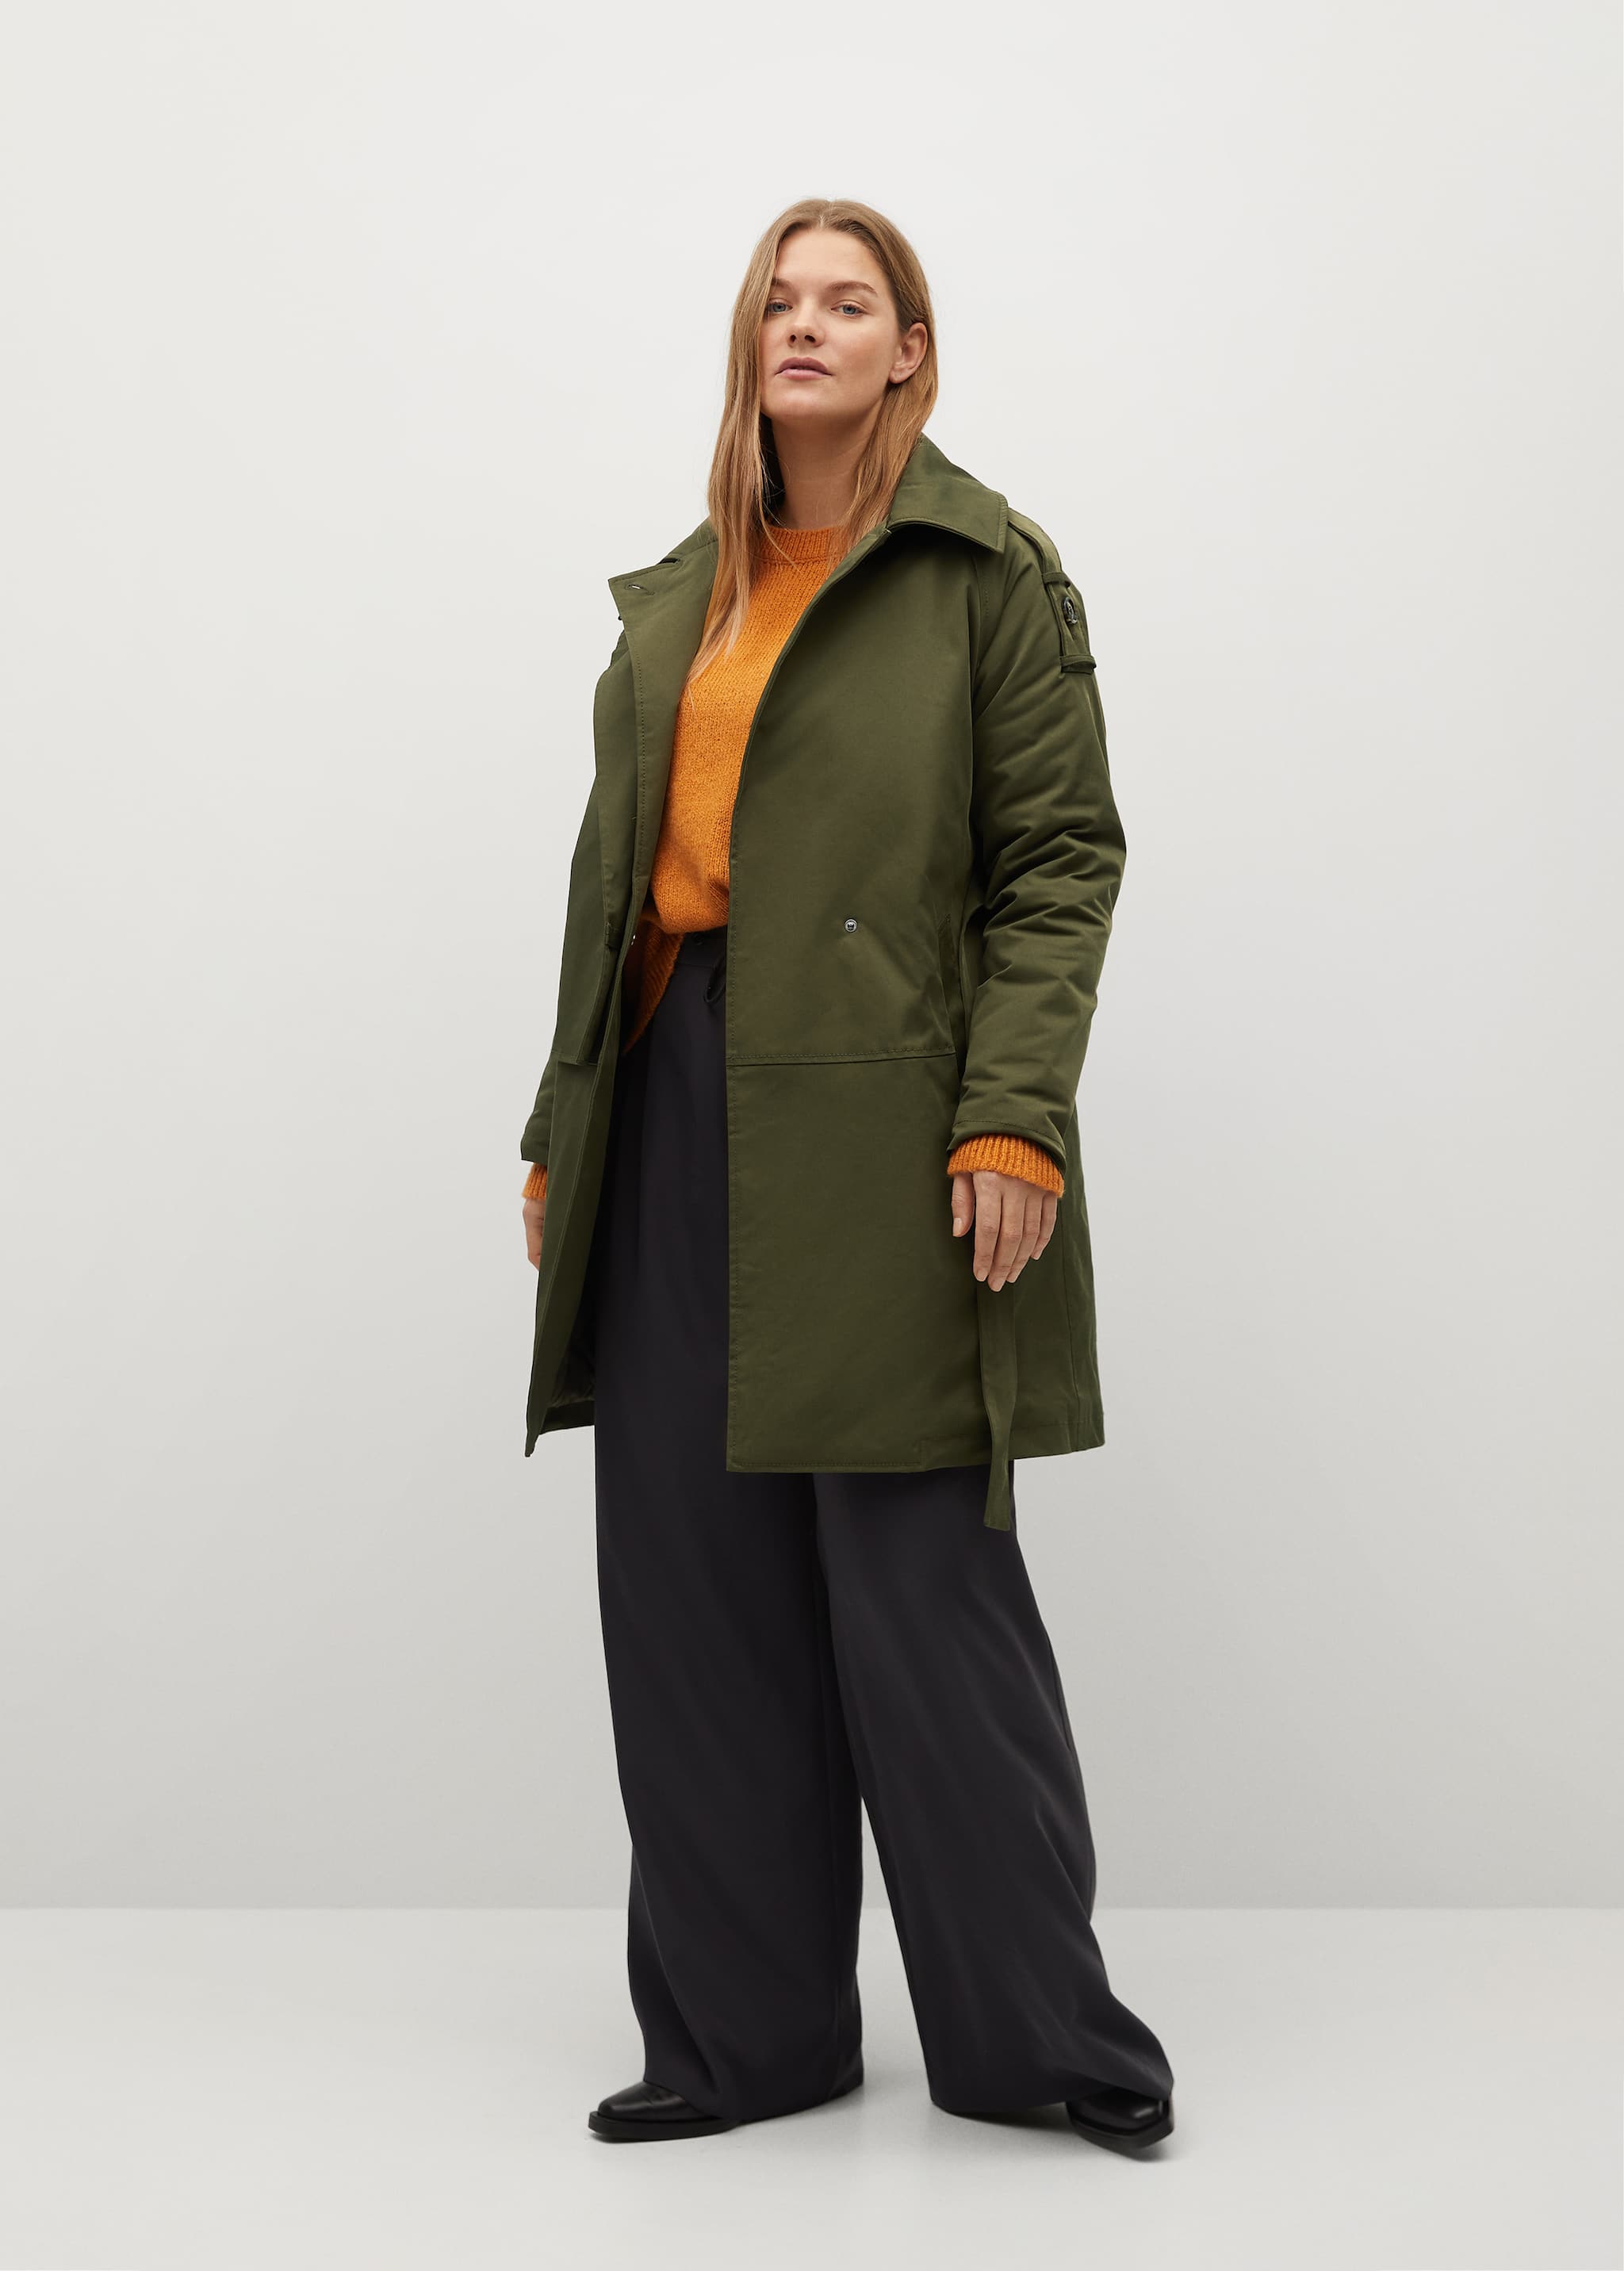 Parka with camp-collar  - General plane